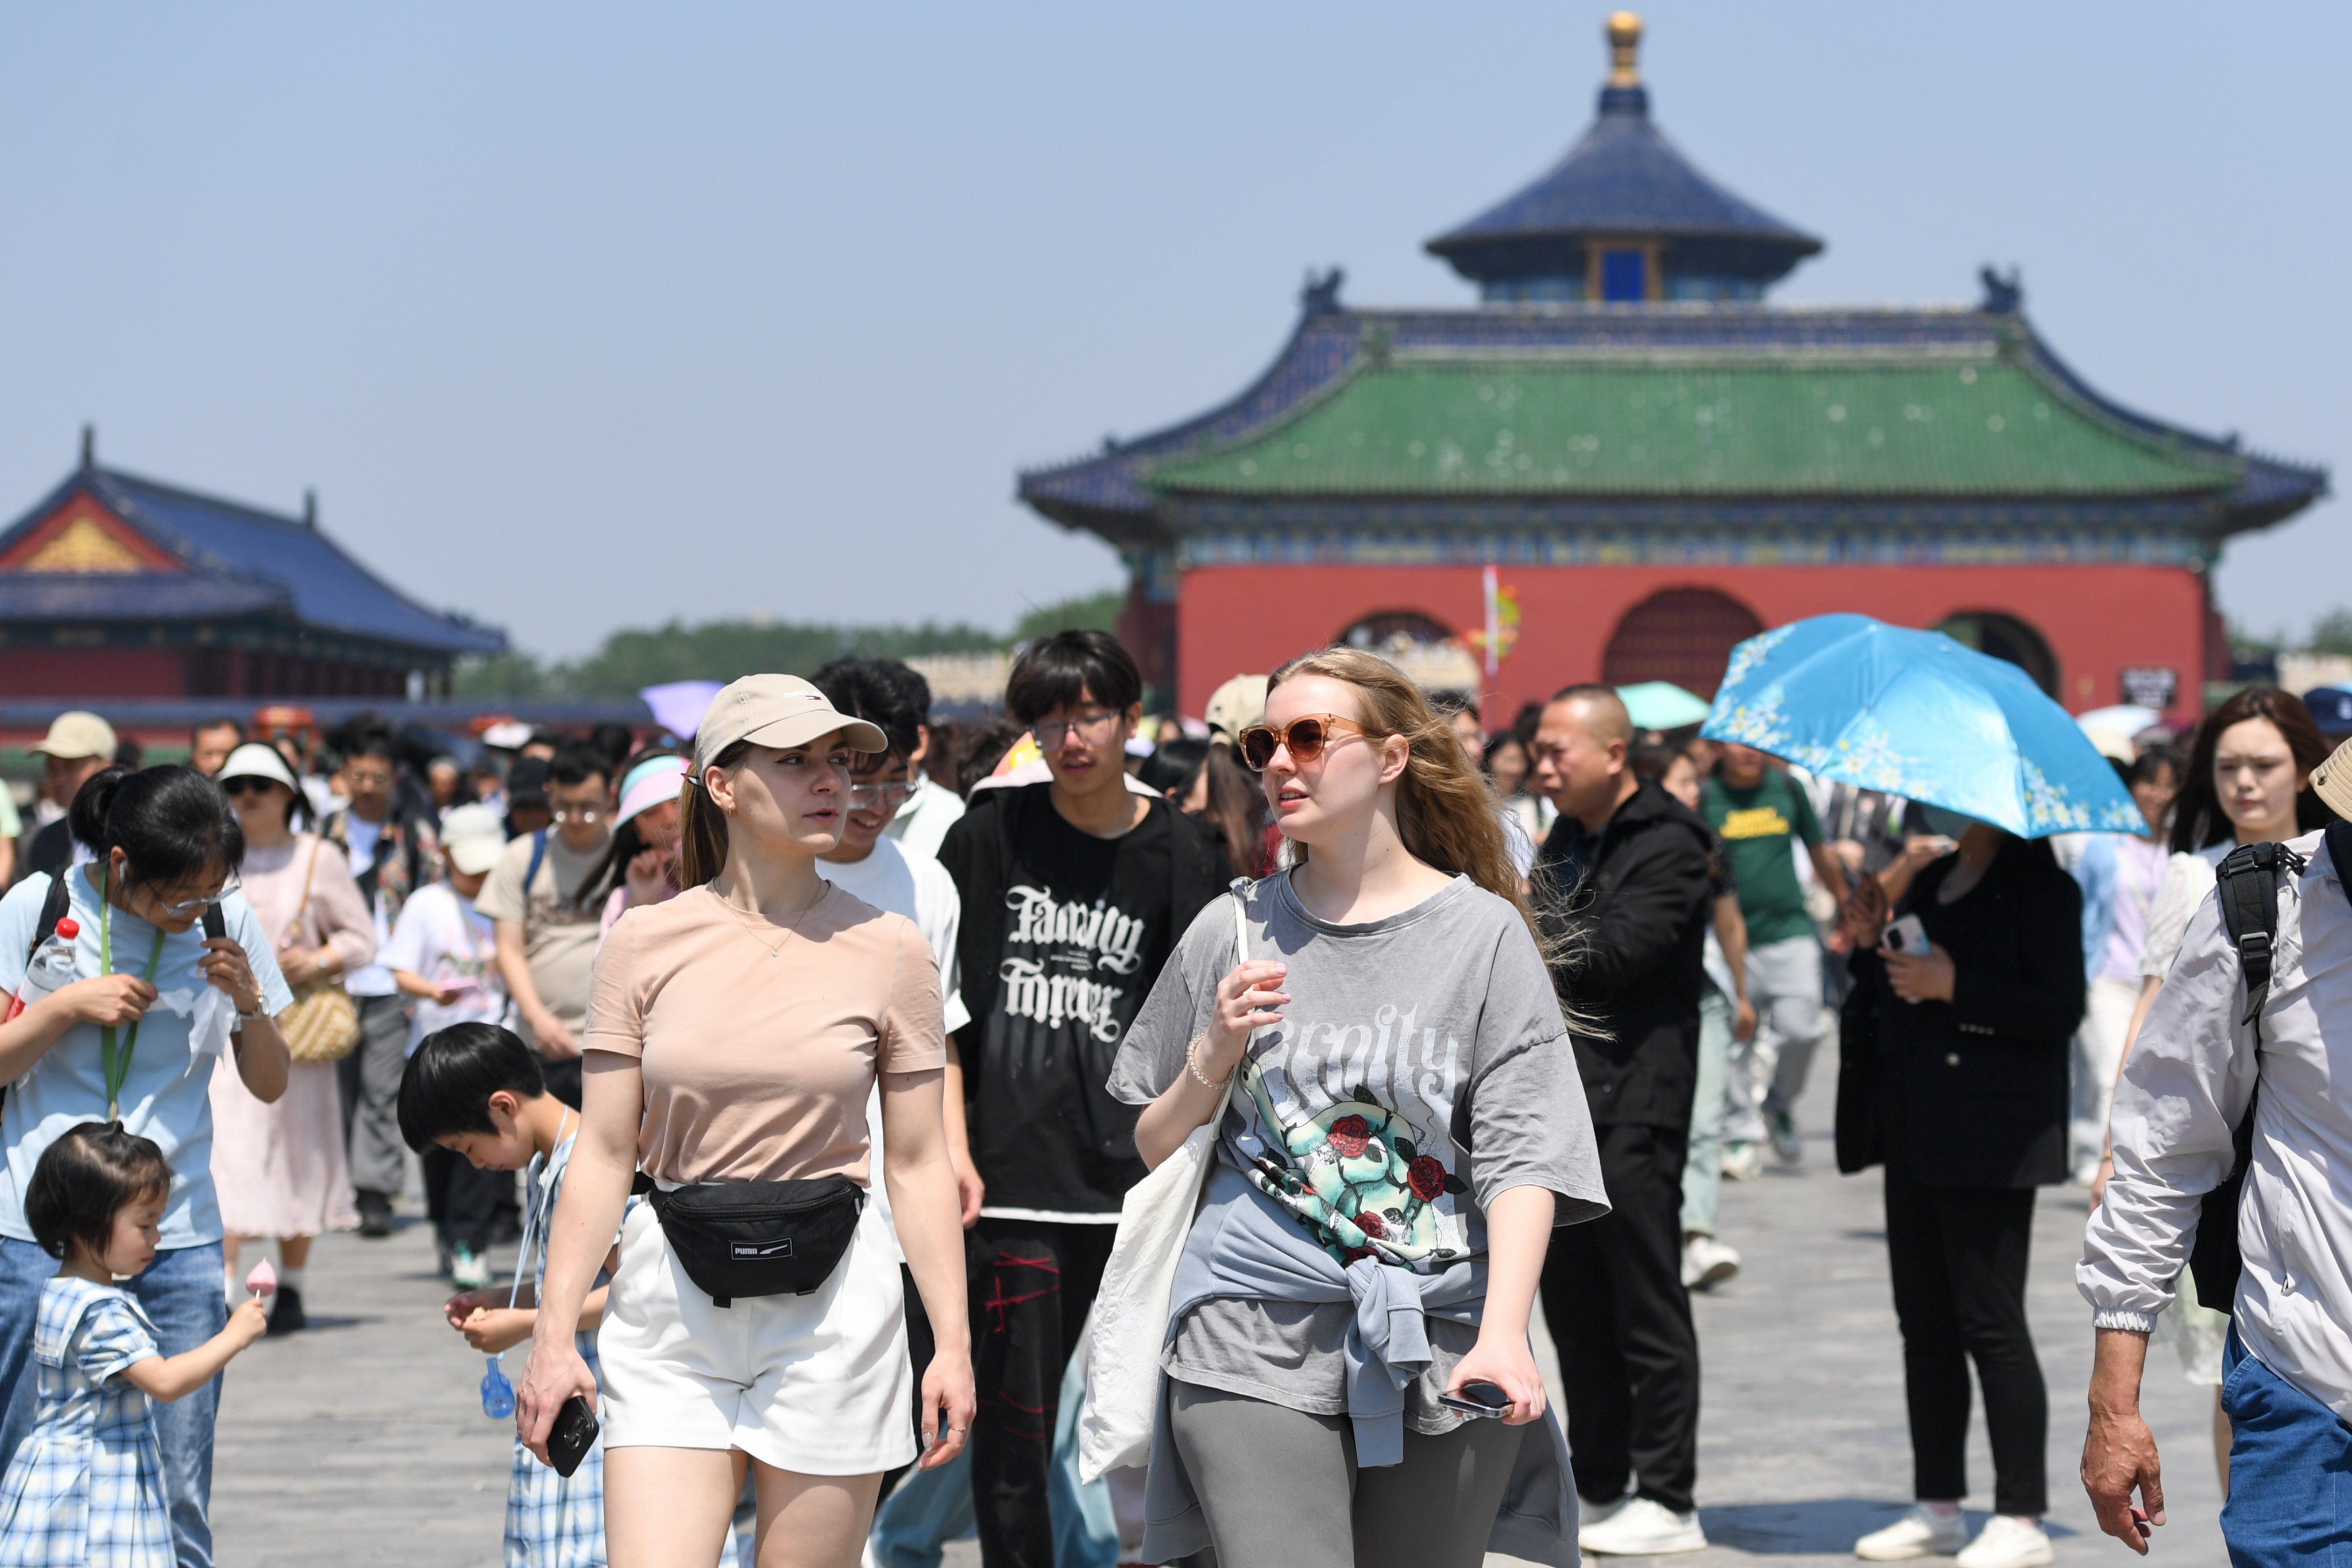 China reopened its borders and abandoned quarantine in January 2023 after shedding three years of its zero-Covid policy. Photo: Xinhua